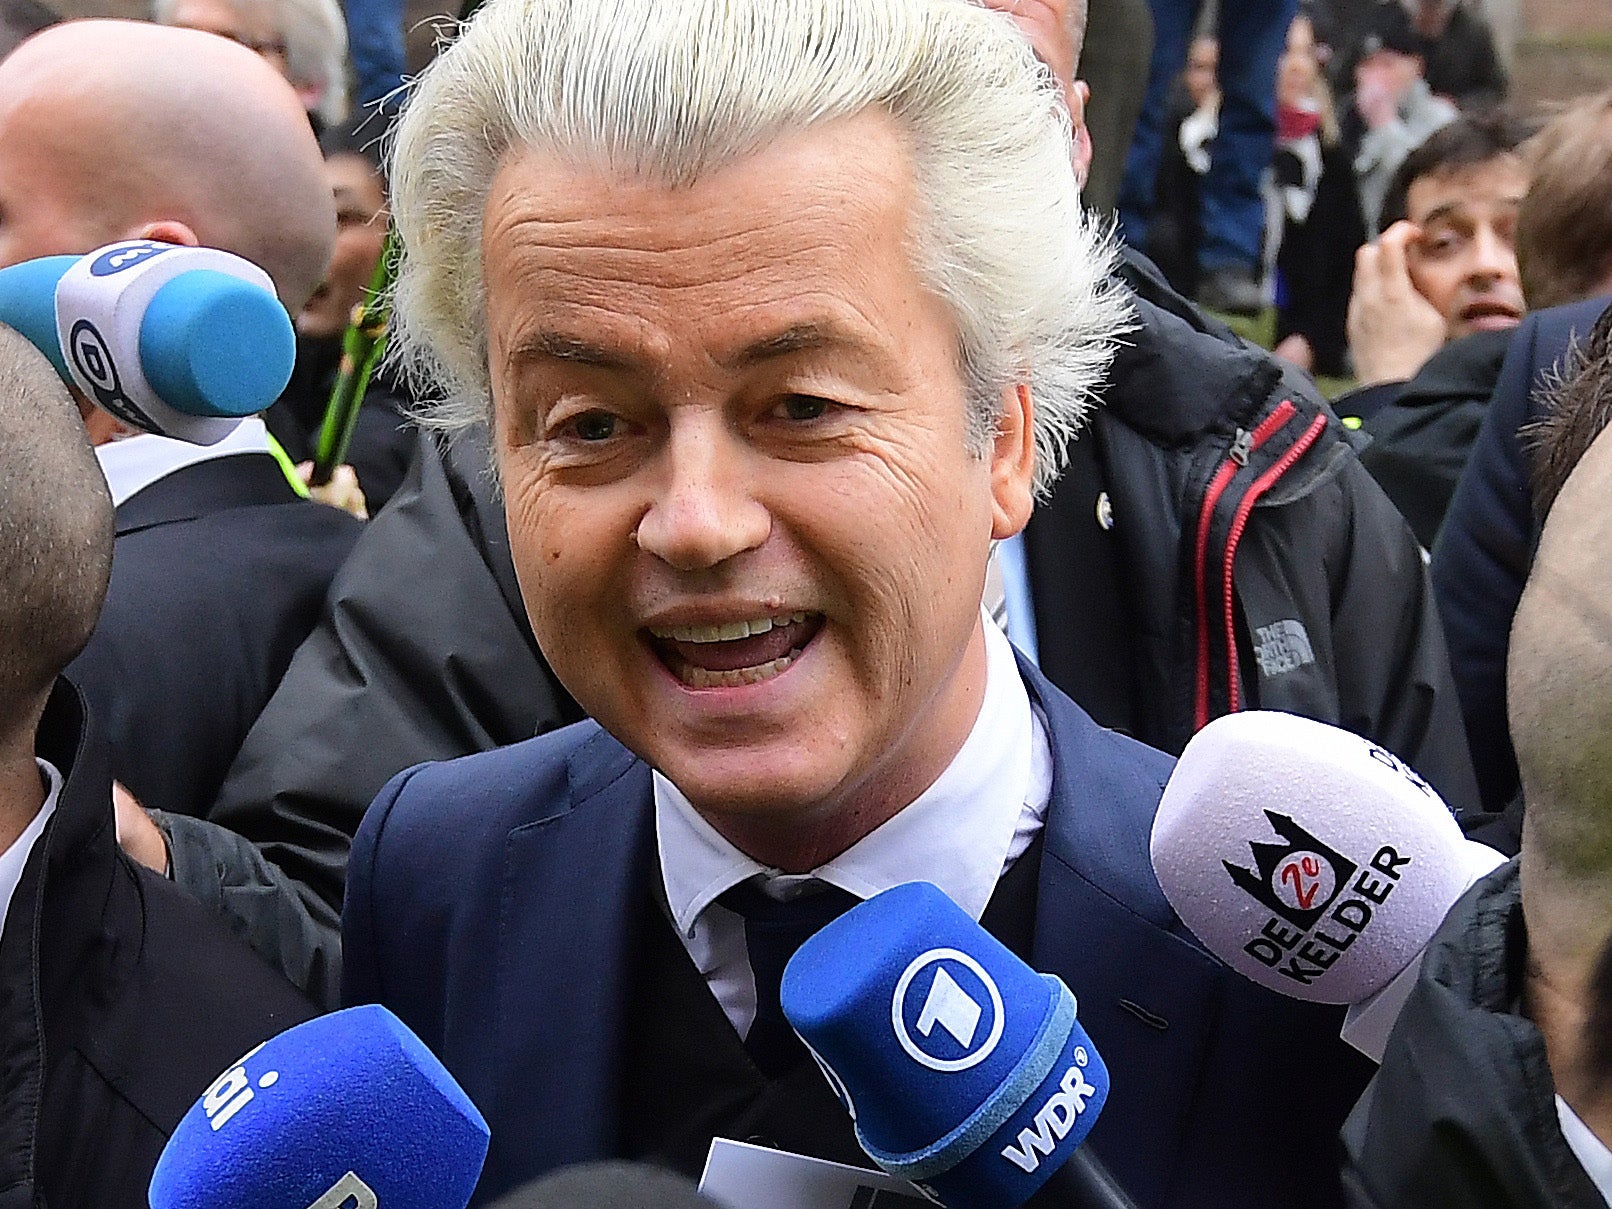 Geert Wilders's one-man Freedom Party is riding high in Dutch polls three weeks ahead of the national elections